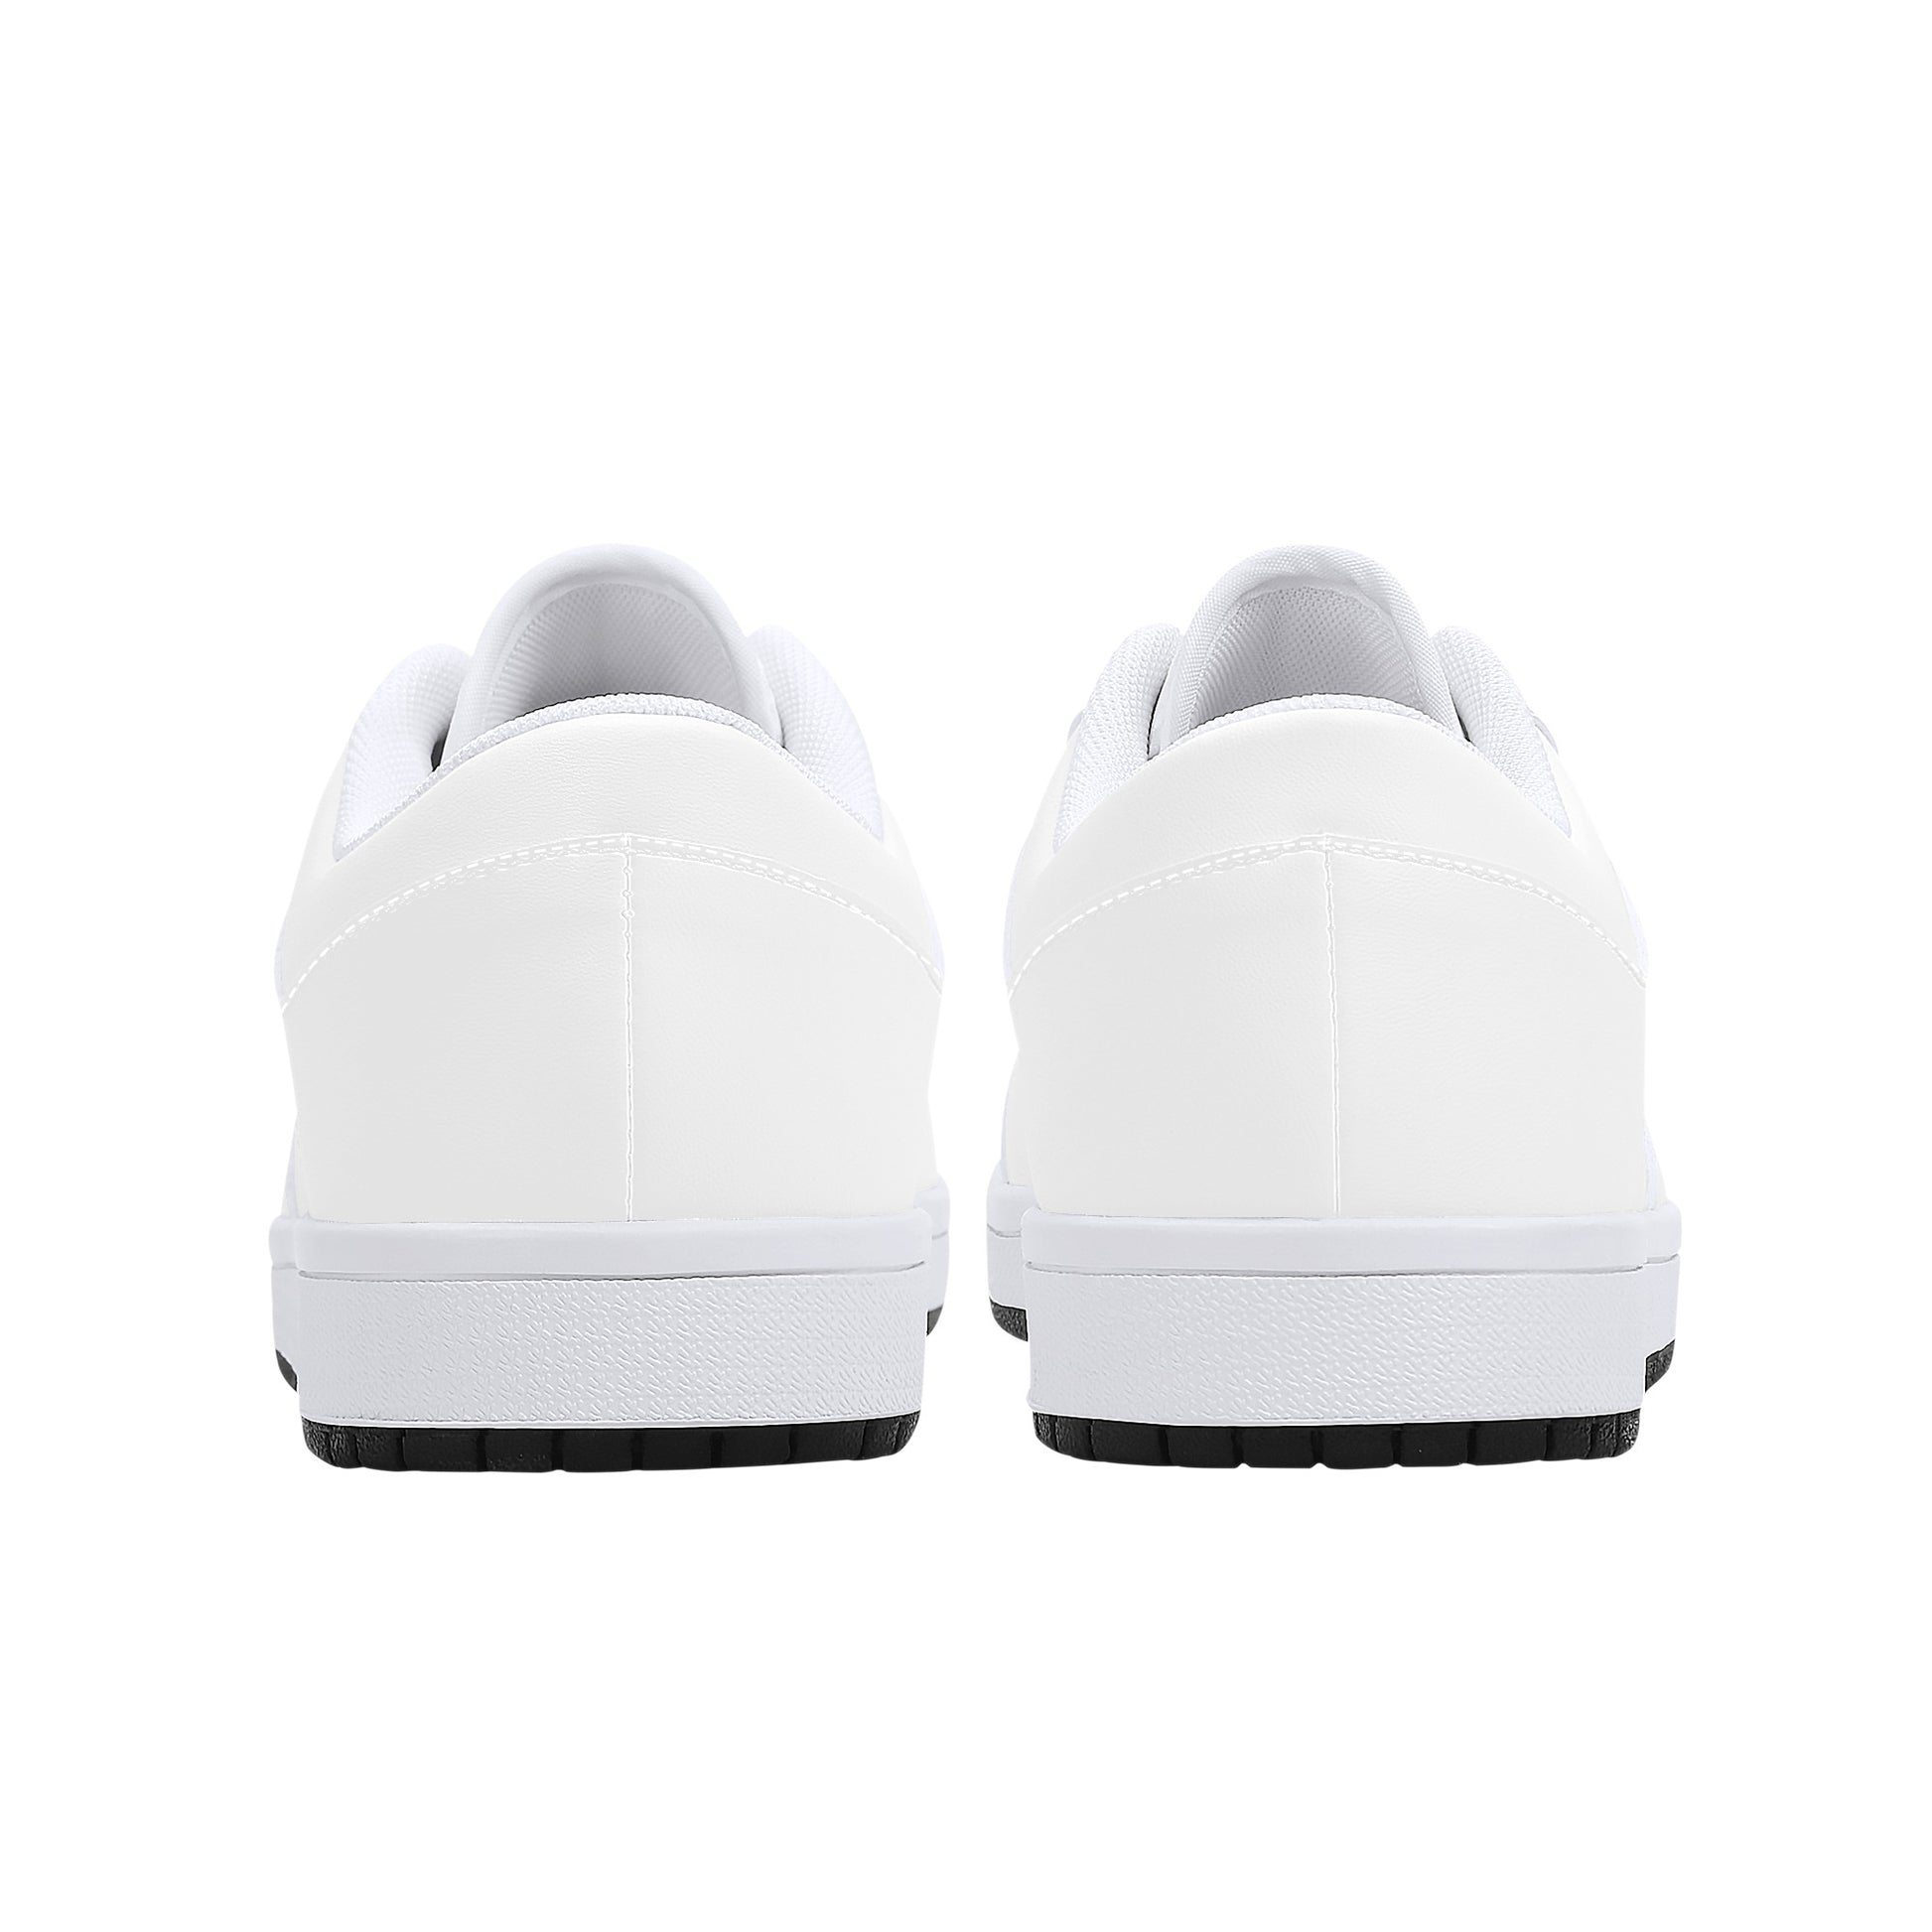 Create Your Own - Low Top Synthetic Leather Sneakers - White - HayGoodies